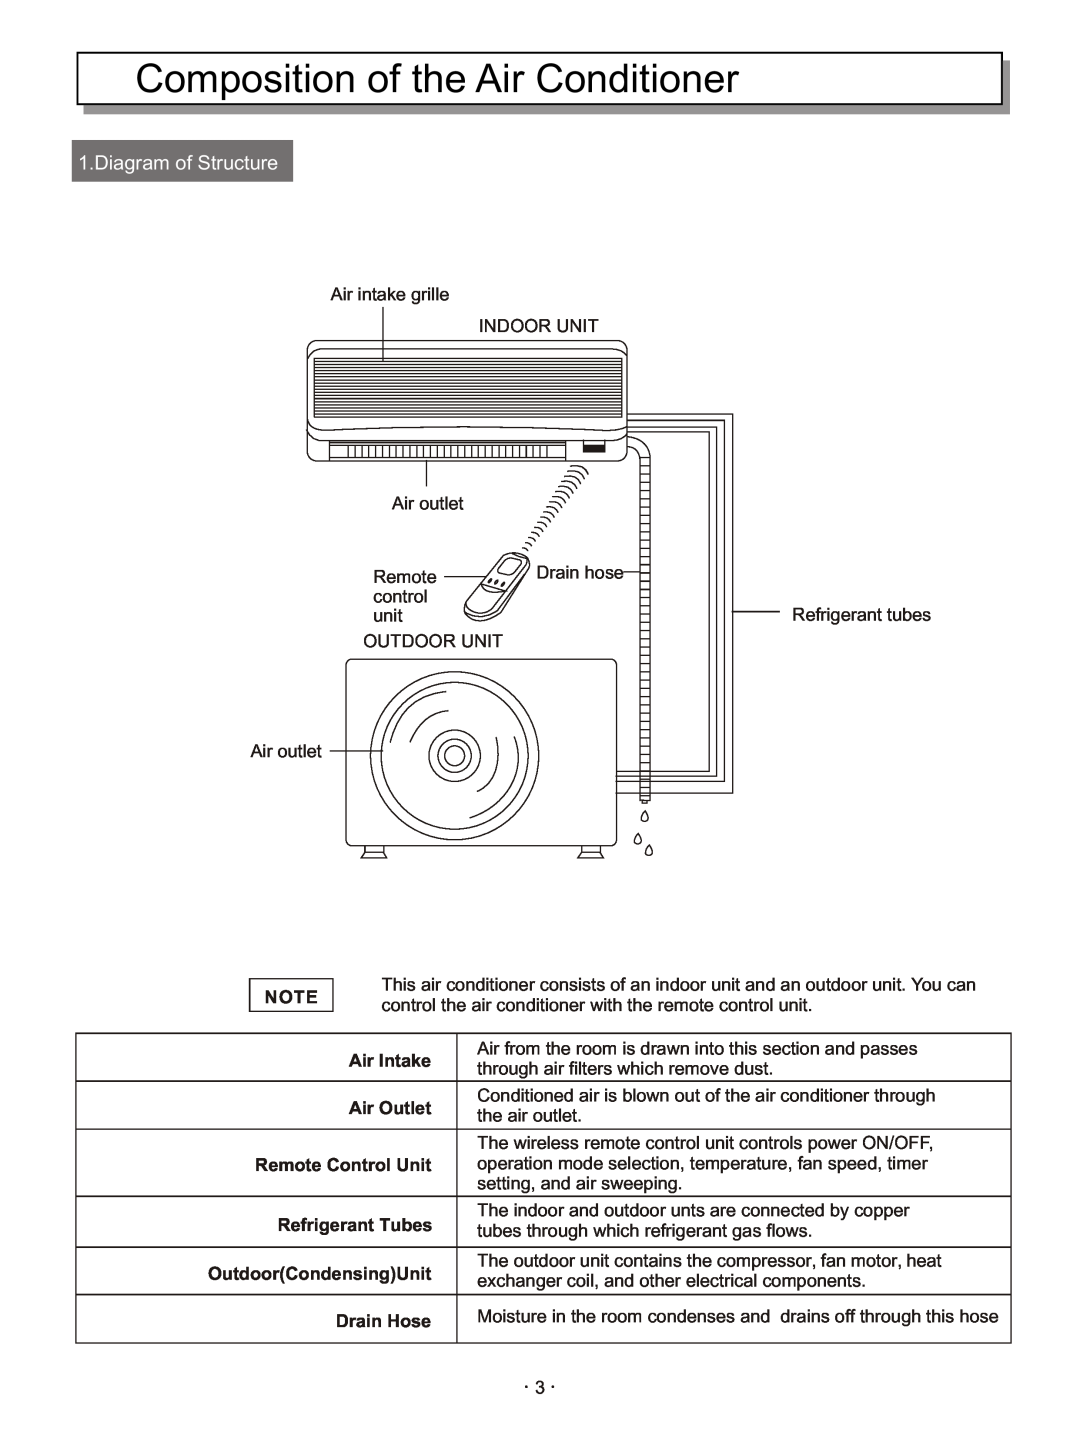 Hisense Group KFR 2601GW/BPE, KFR 2801GW/BPE instruction manual Composition of the Air Conditioner, Diagram of Structure 